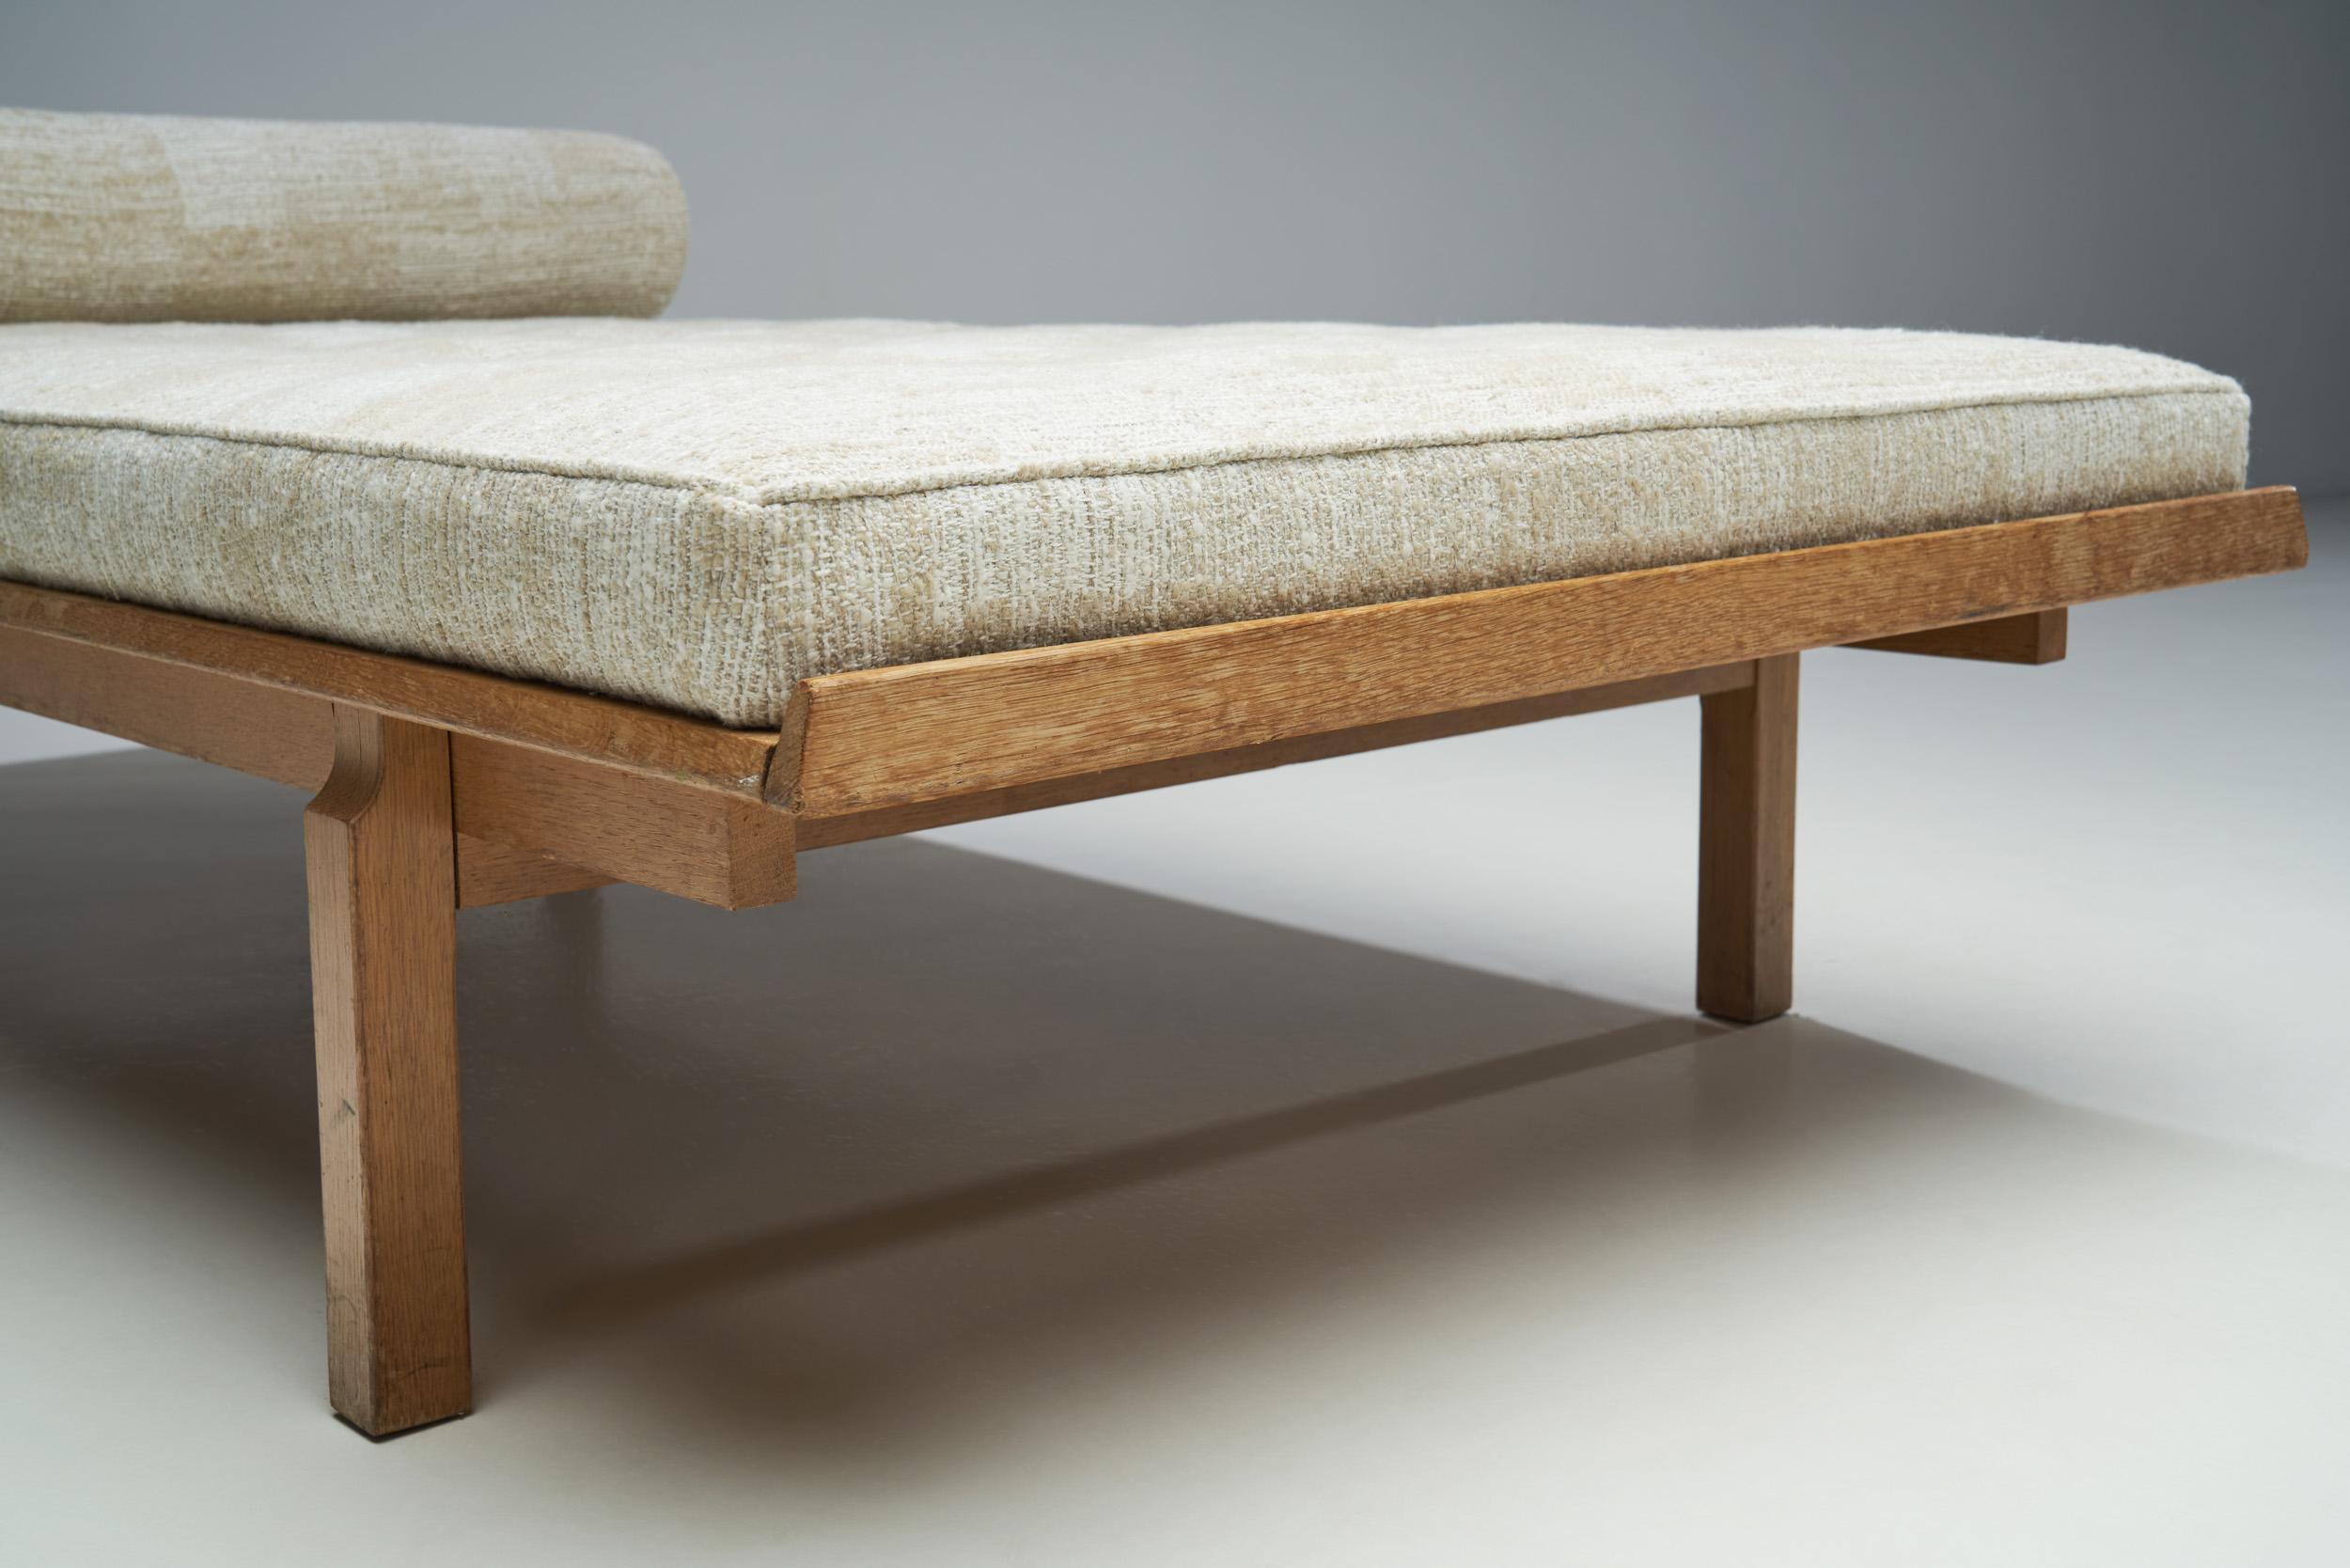 Danish Oak Daybed with Upholstered Mattress and Pillow, Denmark, ca 1950s For Sale 6